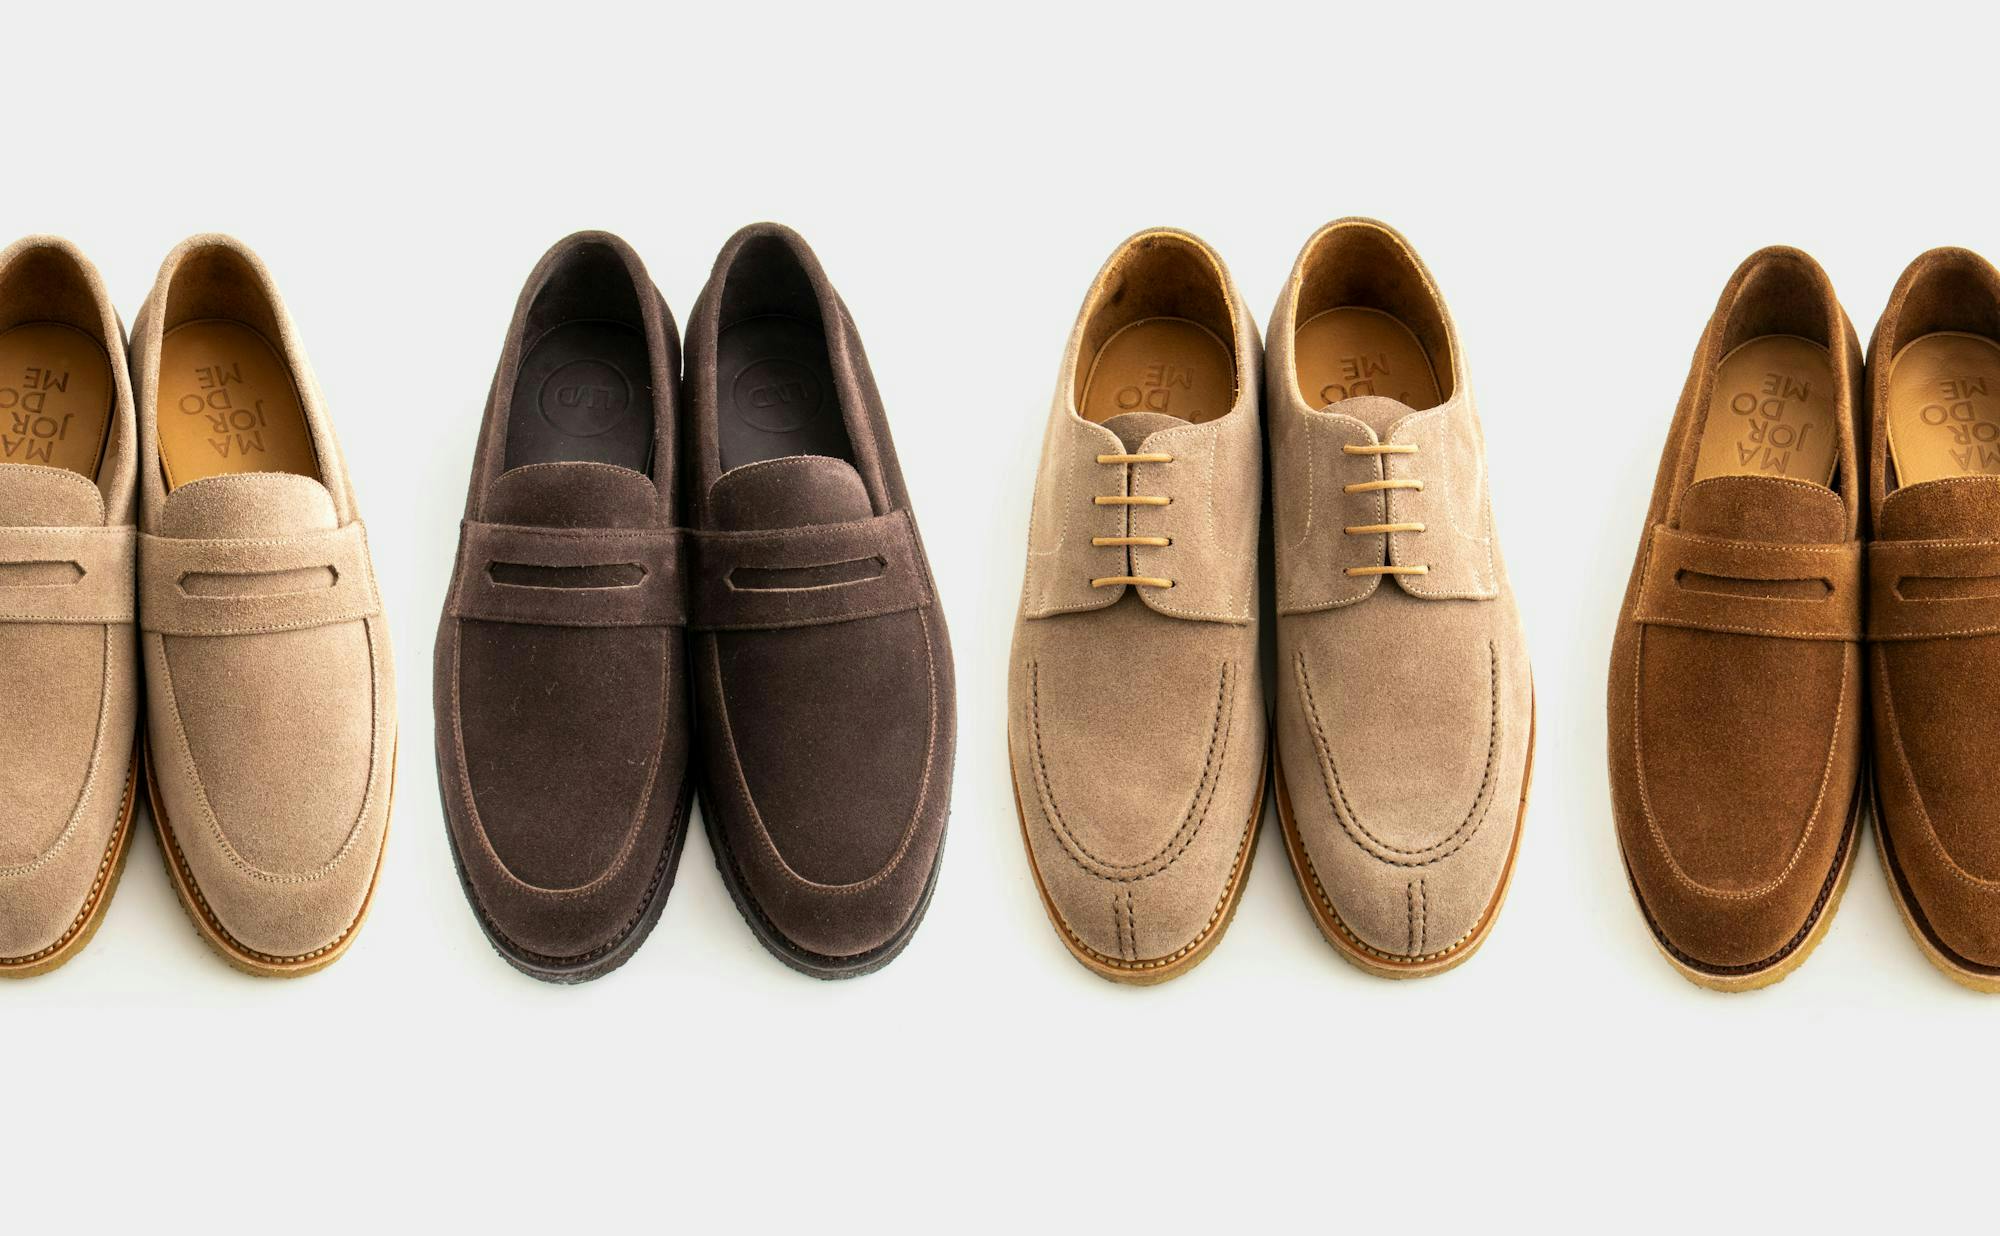 Four pairs of suede Majordome shoes.